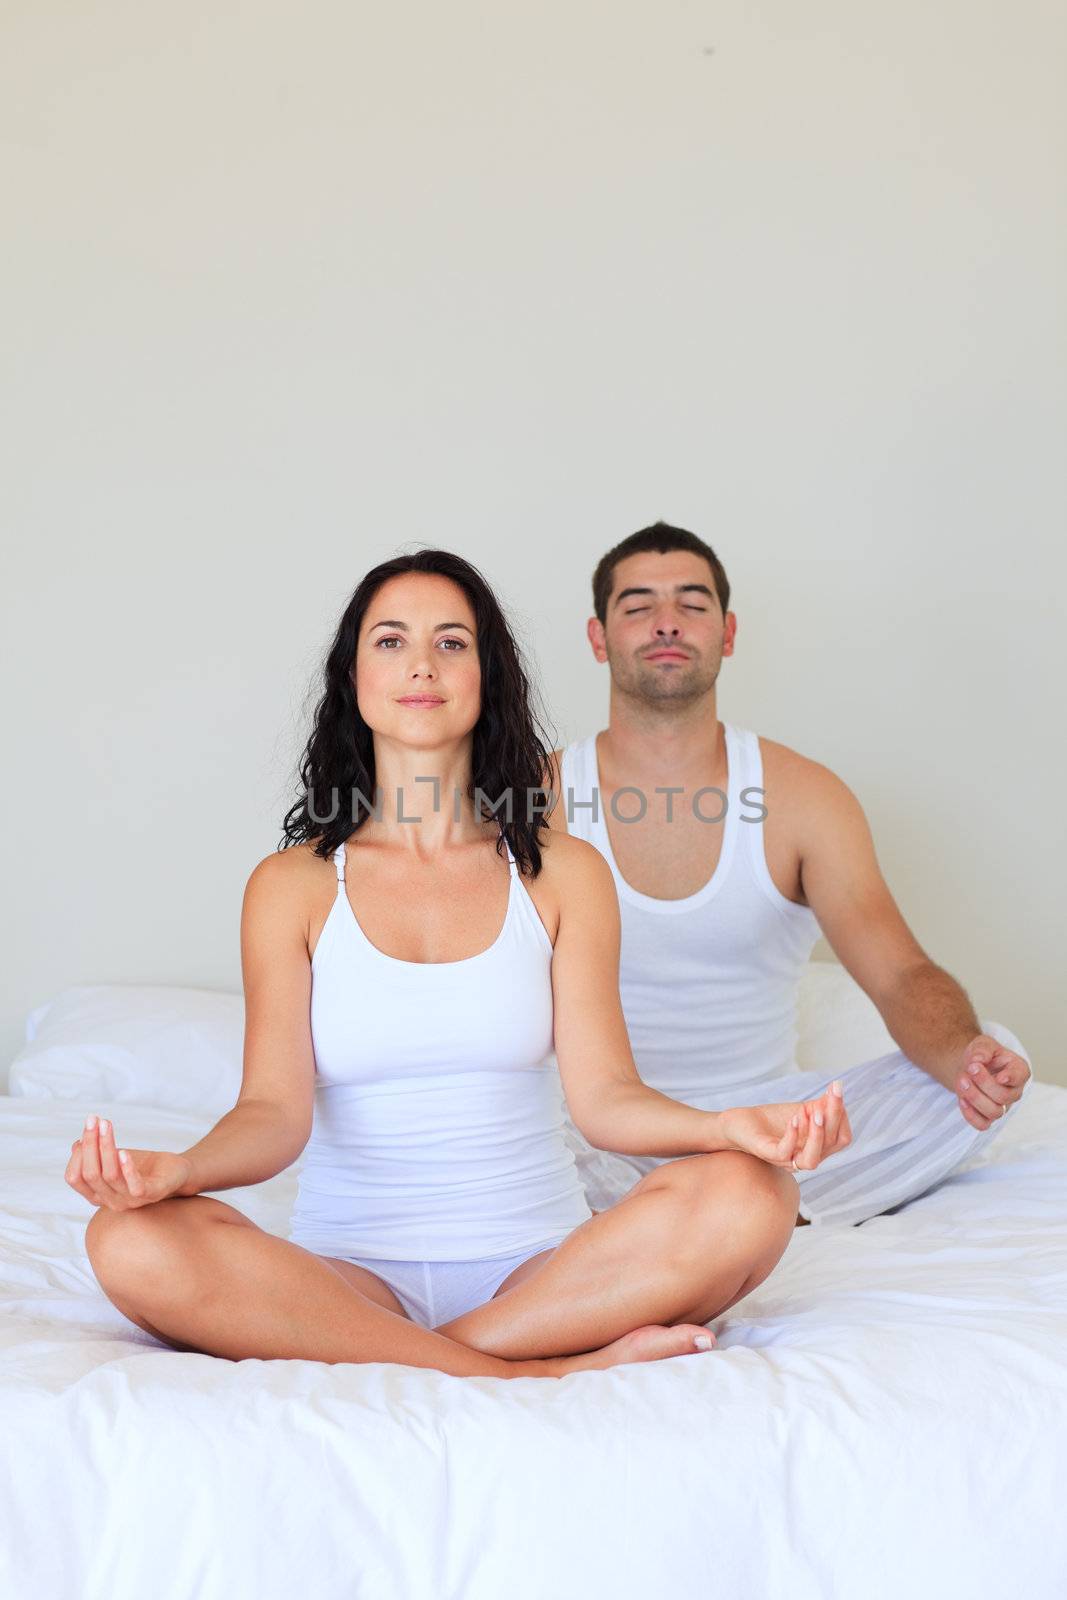 Couple in meditation pose on bed by Wavebreakmedia